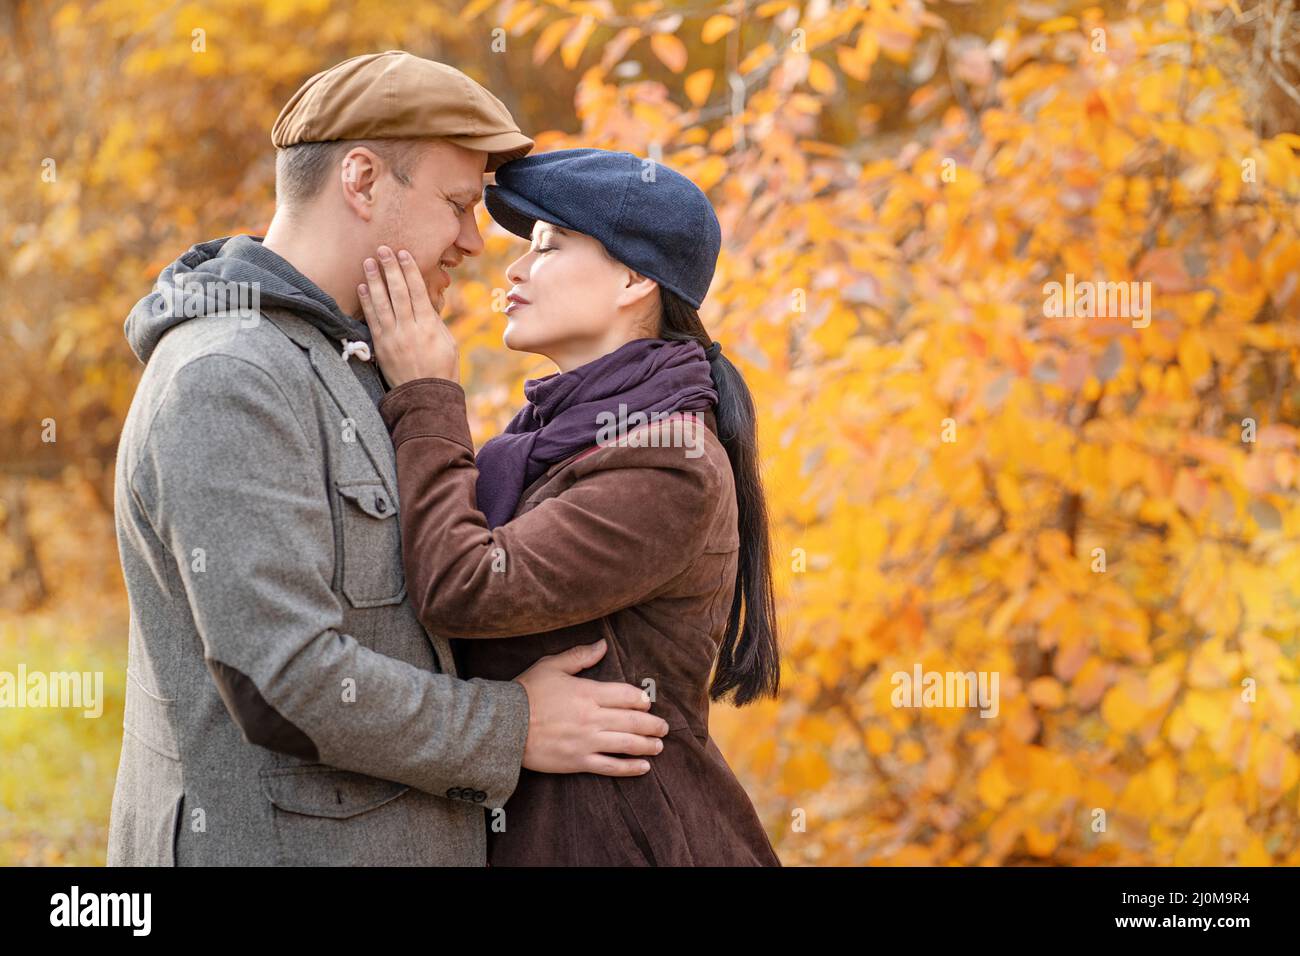 Caucasian Fall Couple Looking at Each Other's Eyes. Casual Couple in Stylish Caps in an Autumn Suburb. Close-up. Fall Background Stock Photo